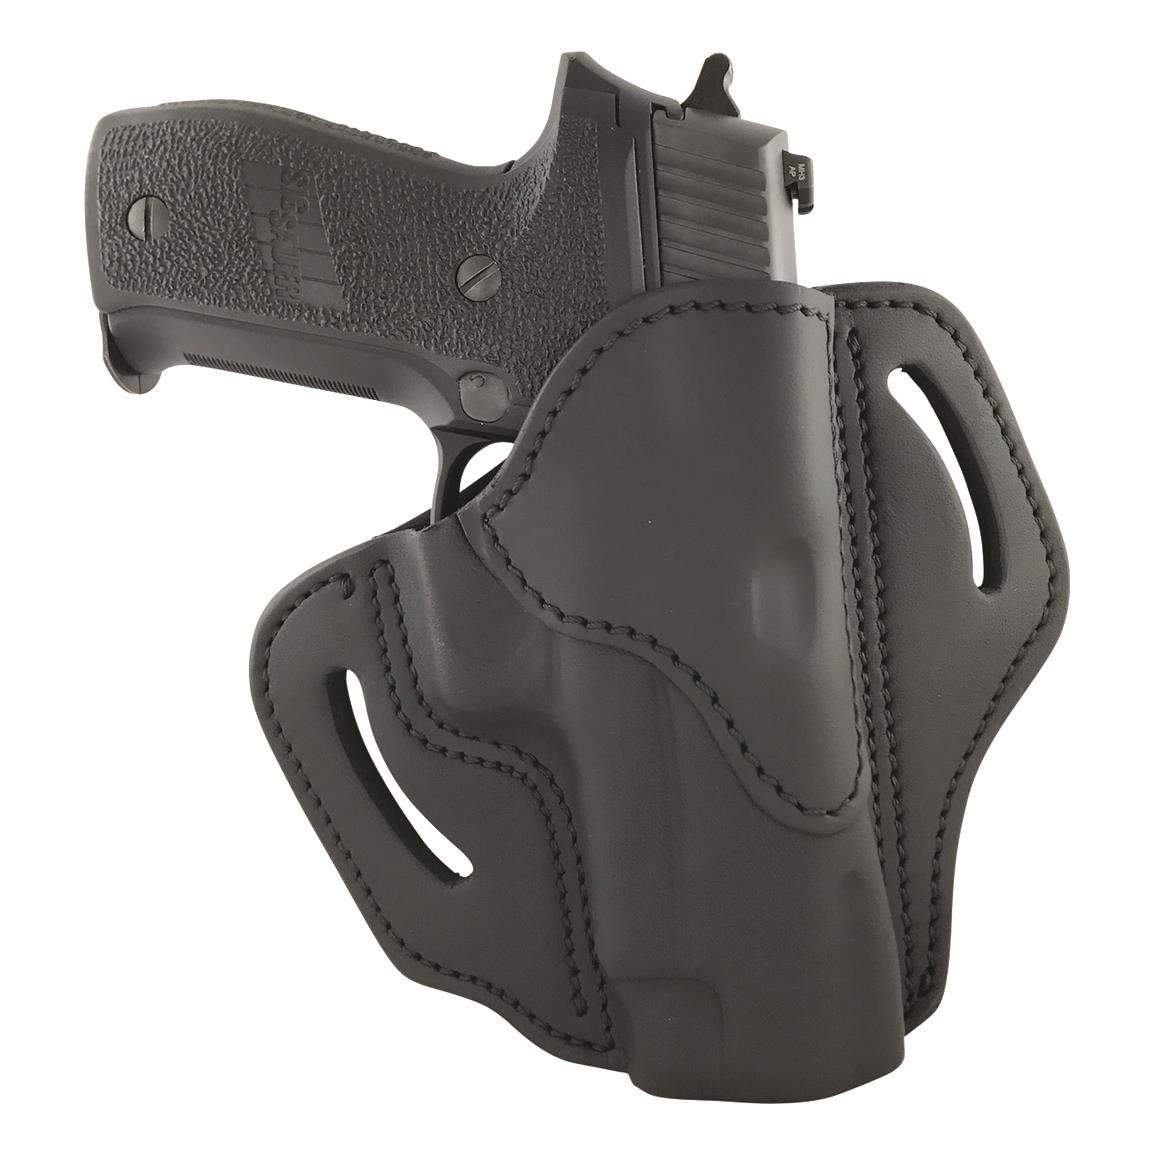 1791 Gunleather BH2.3 OWB Holster, Multi-Fit